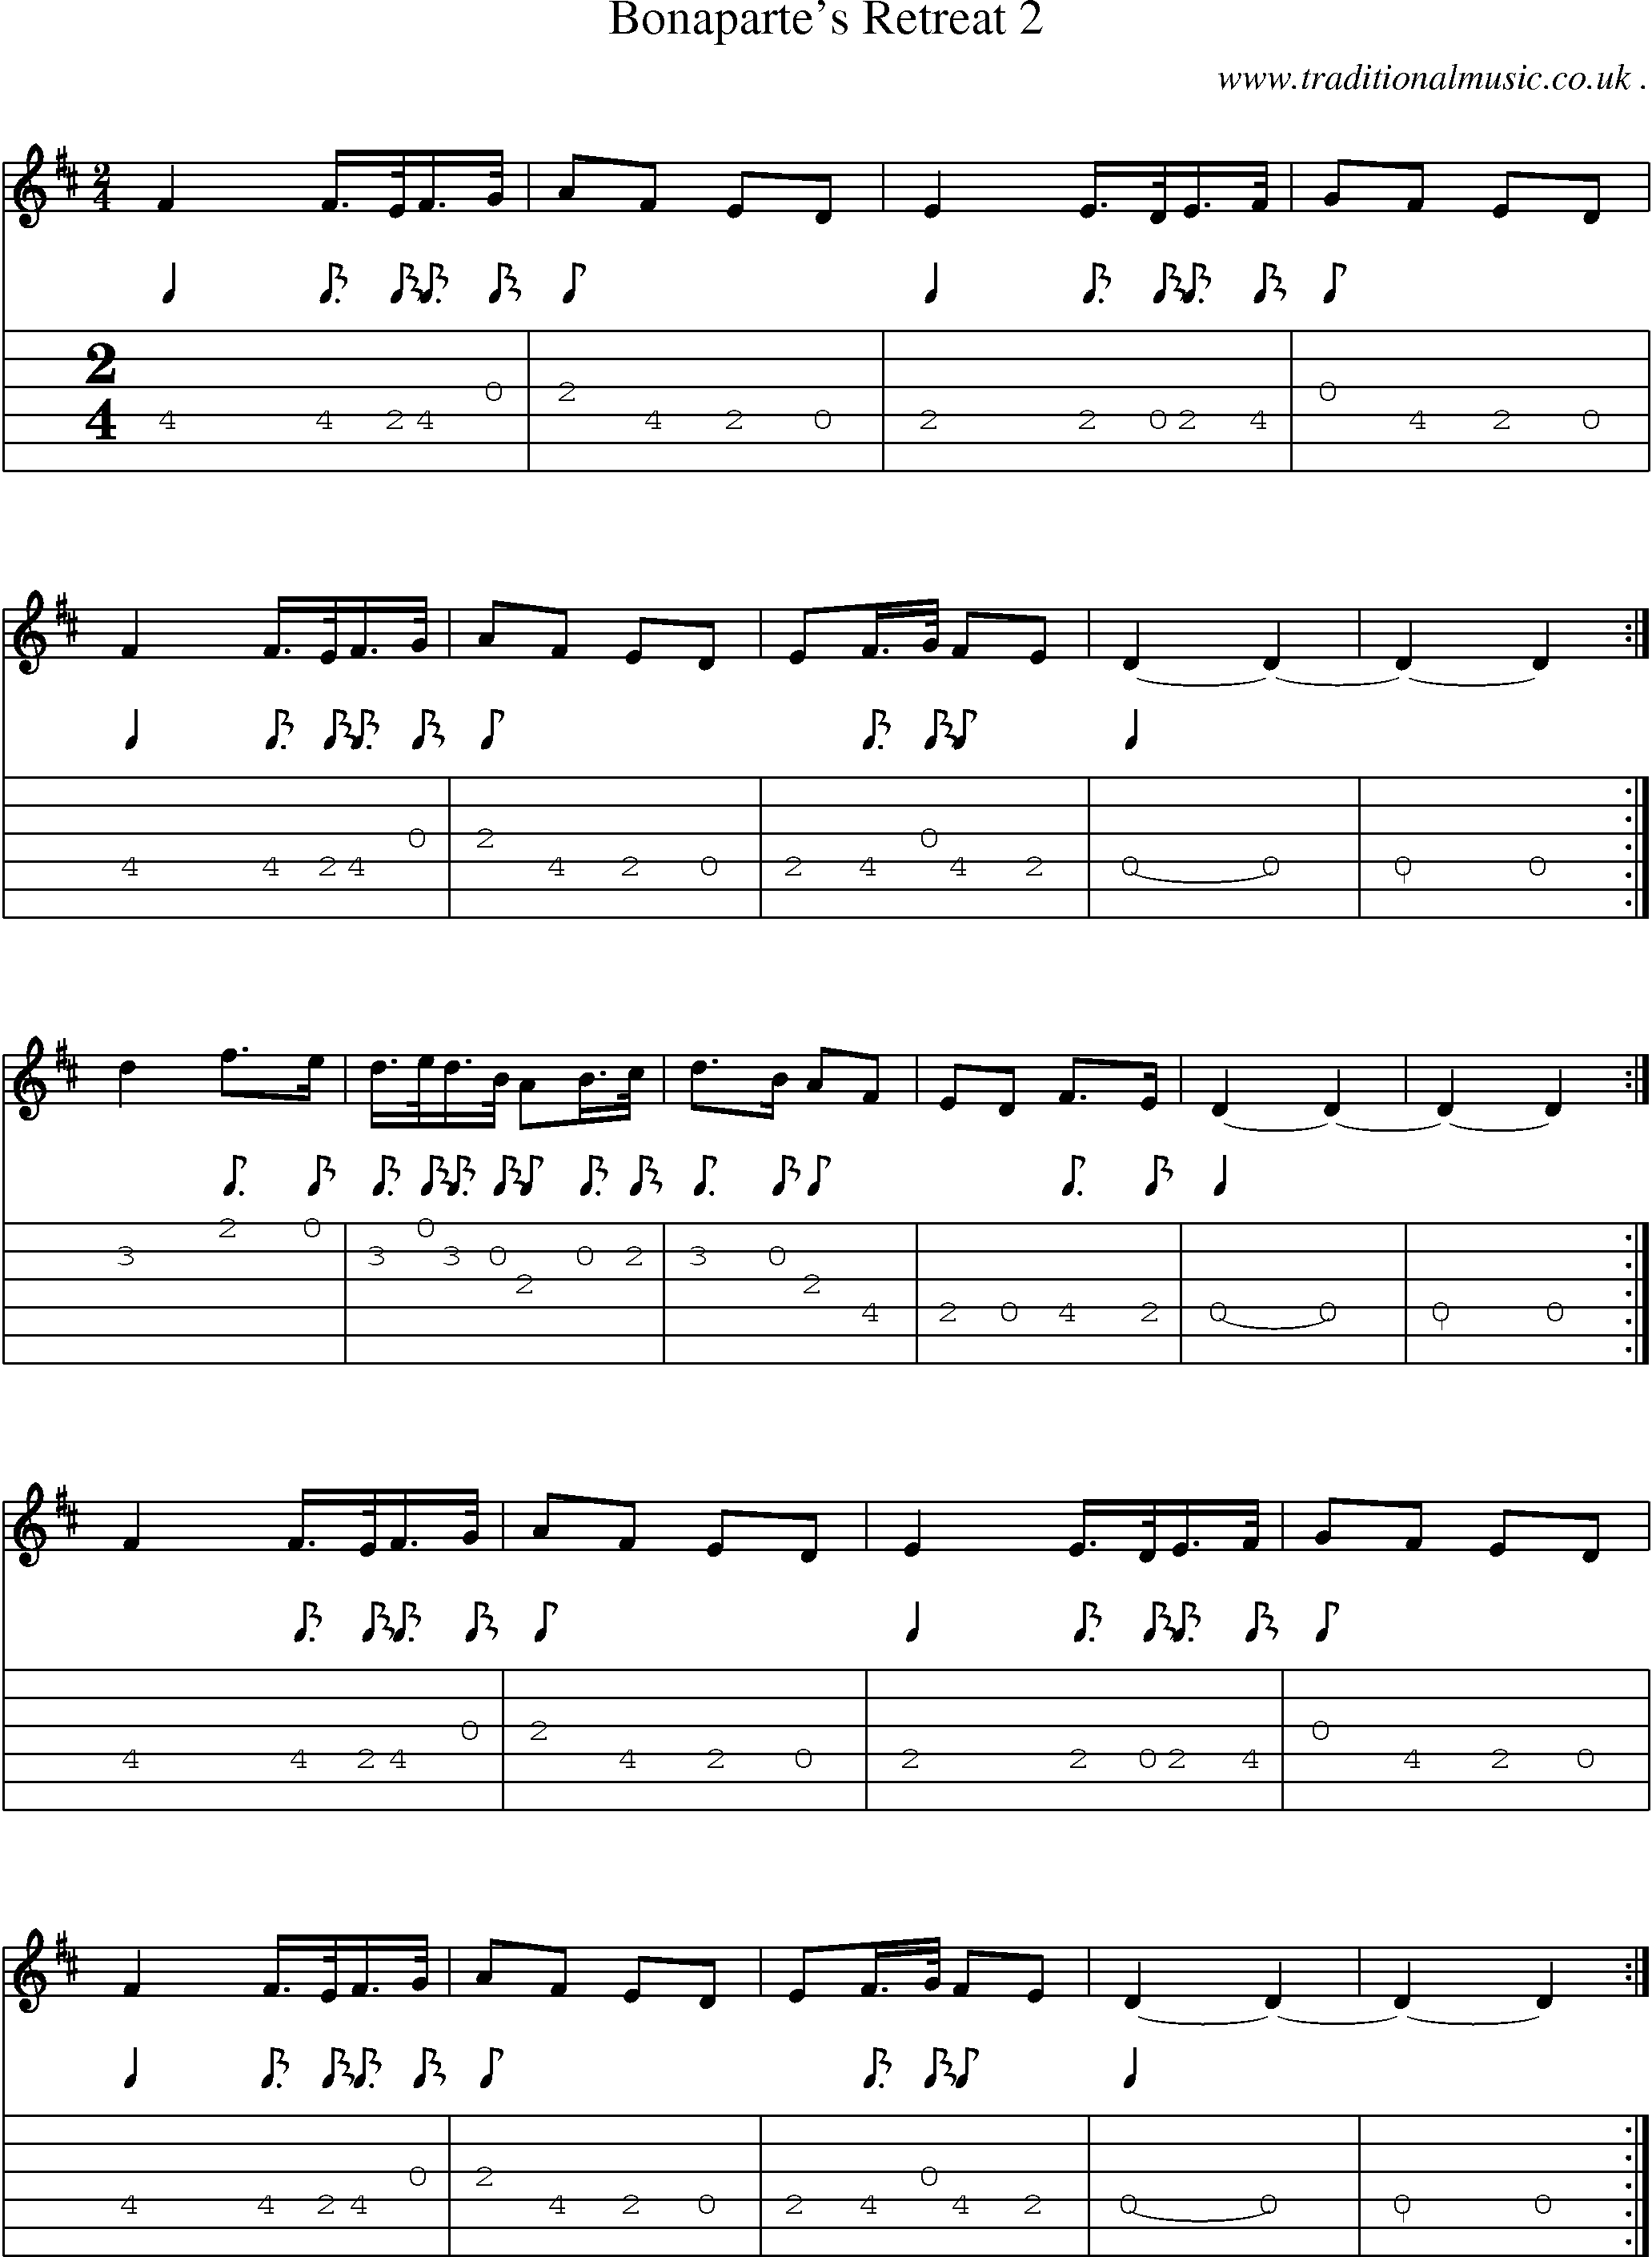 Music Score and Guitar Tabs for Bonapartes Retreat 2